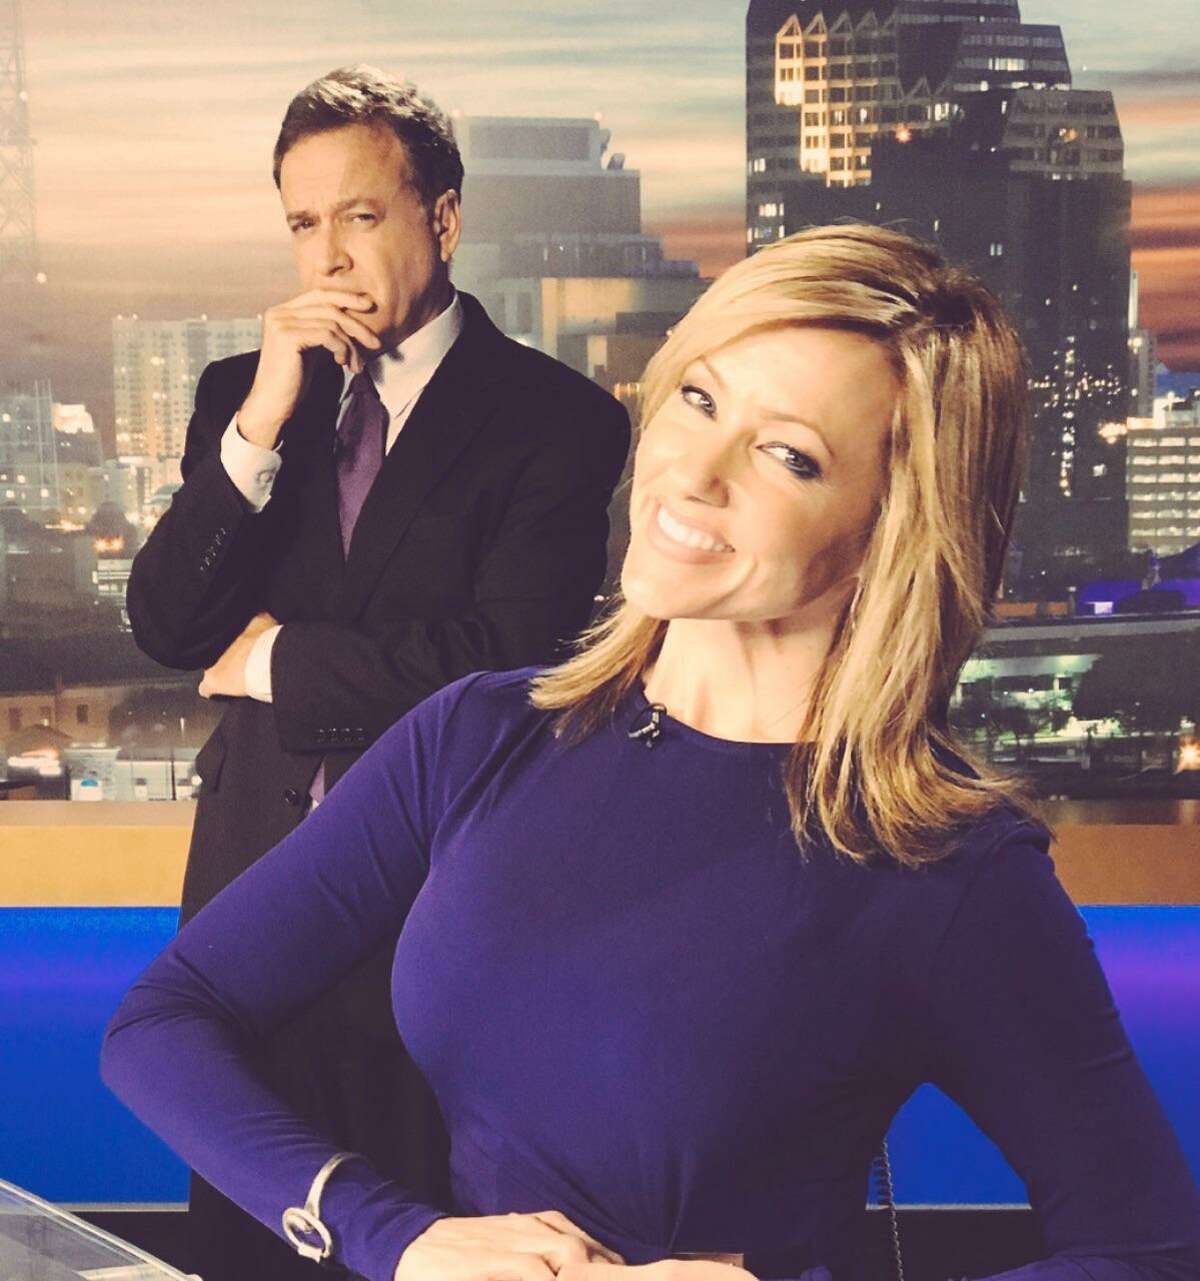 WOAI-TV’s 5 p.m. anchorwoman Delaine Mathieu may get a little playful on the air as co-anchor Randy Beamer knows all too well. . .